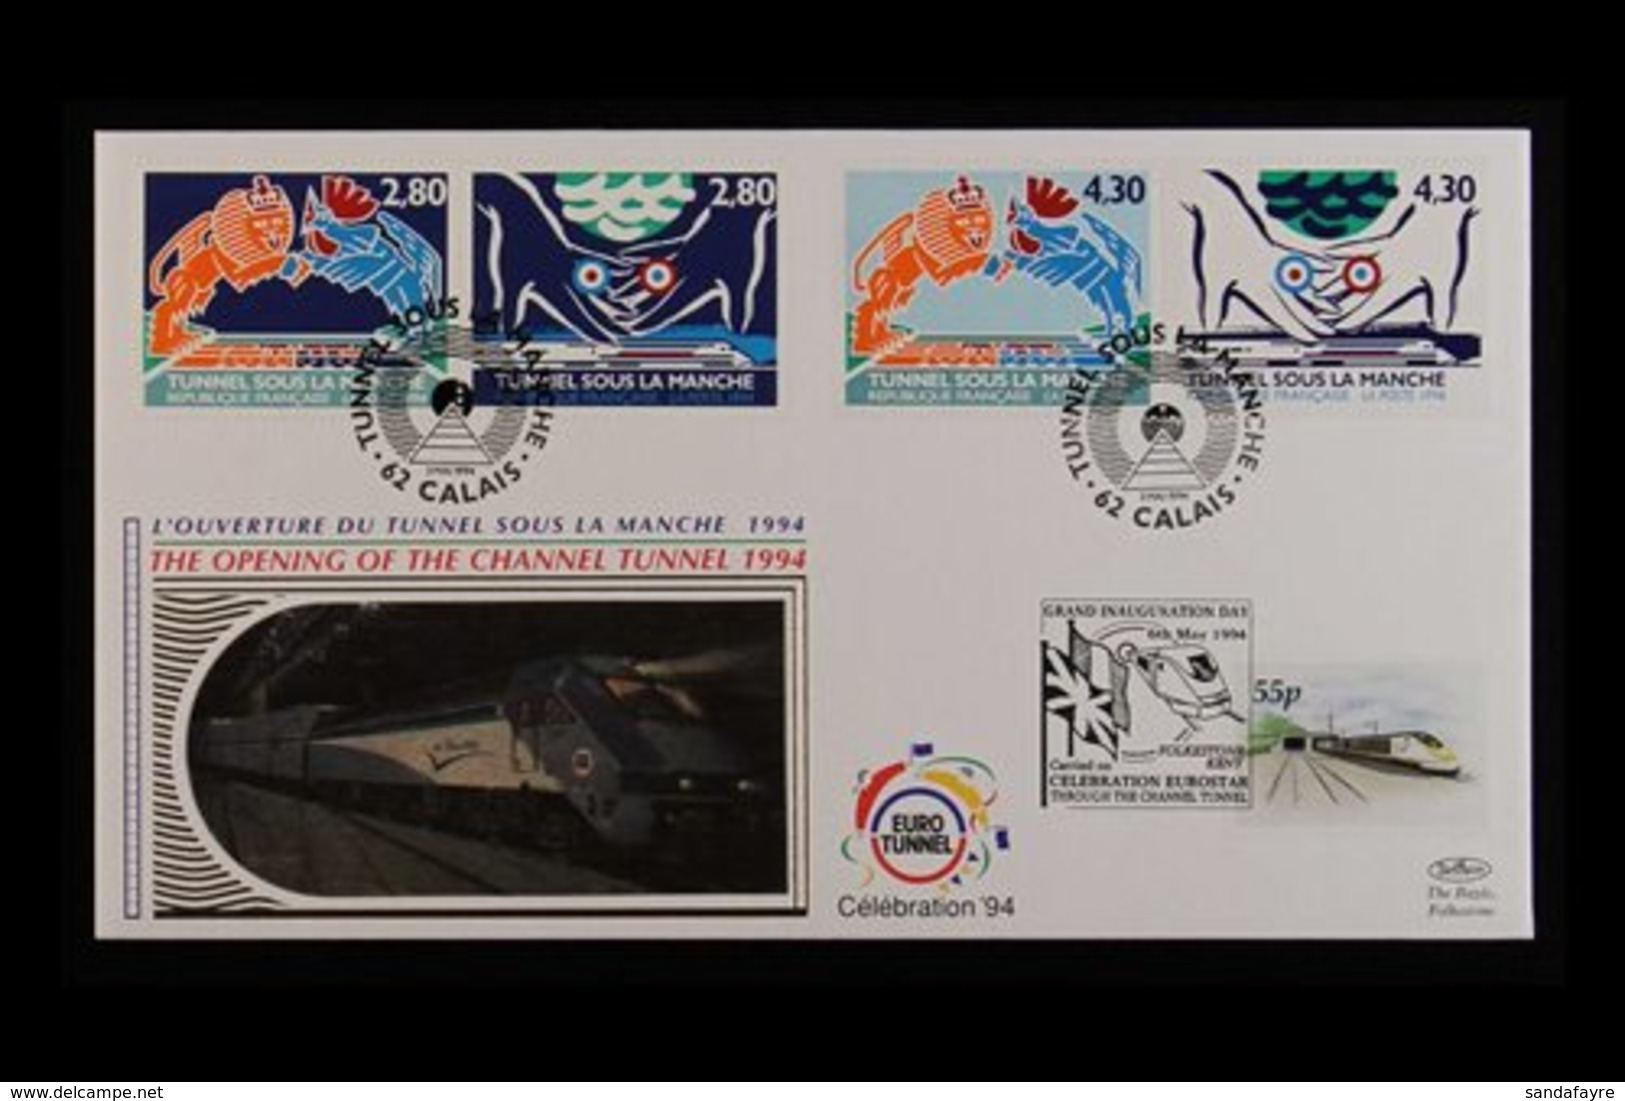 CHANNEL TUNNEL  1994 English And French Limited Edition Benhams FDC's, Both Presentation Packs, Rail Letter Stamps Prese - Unclassified